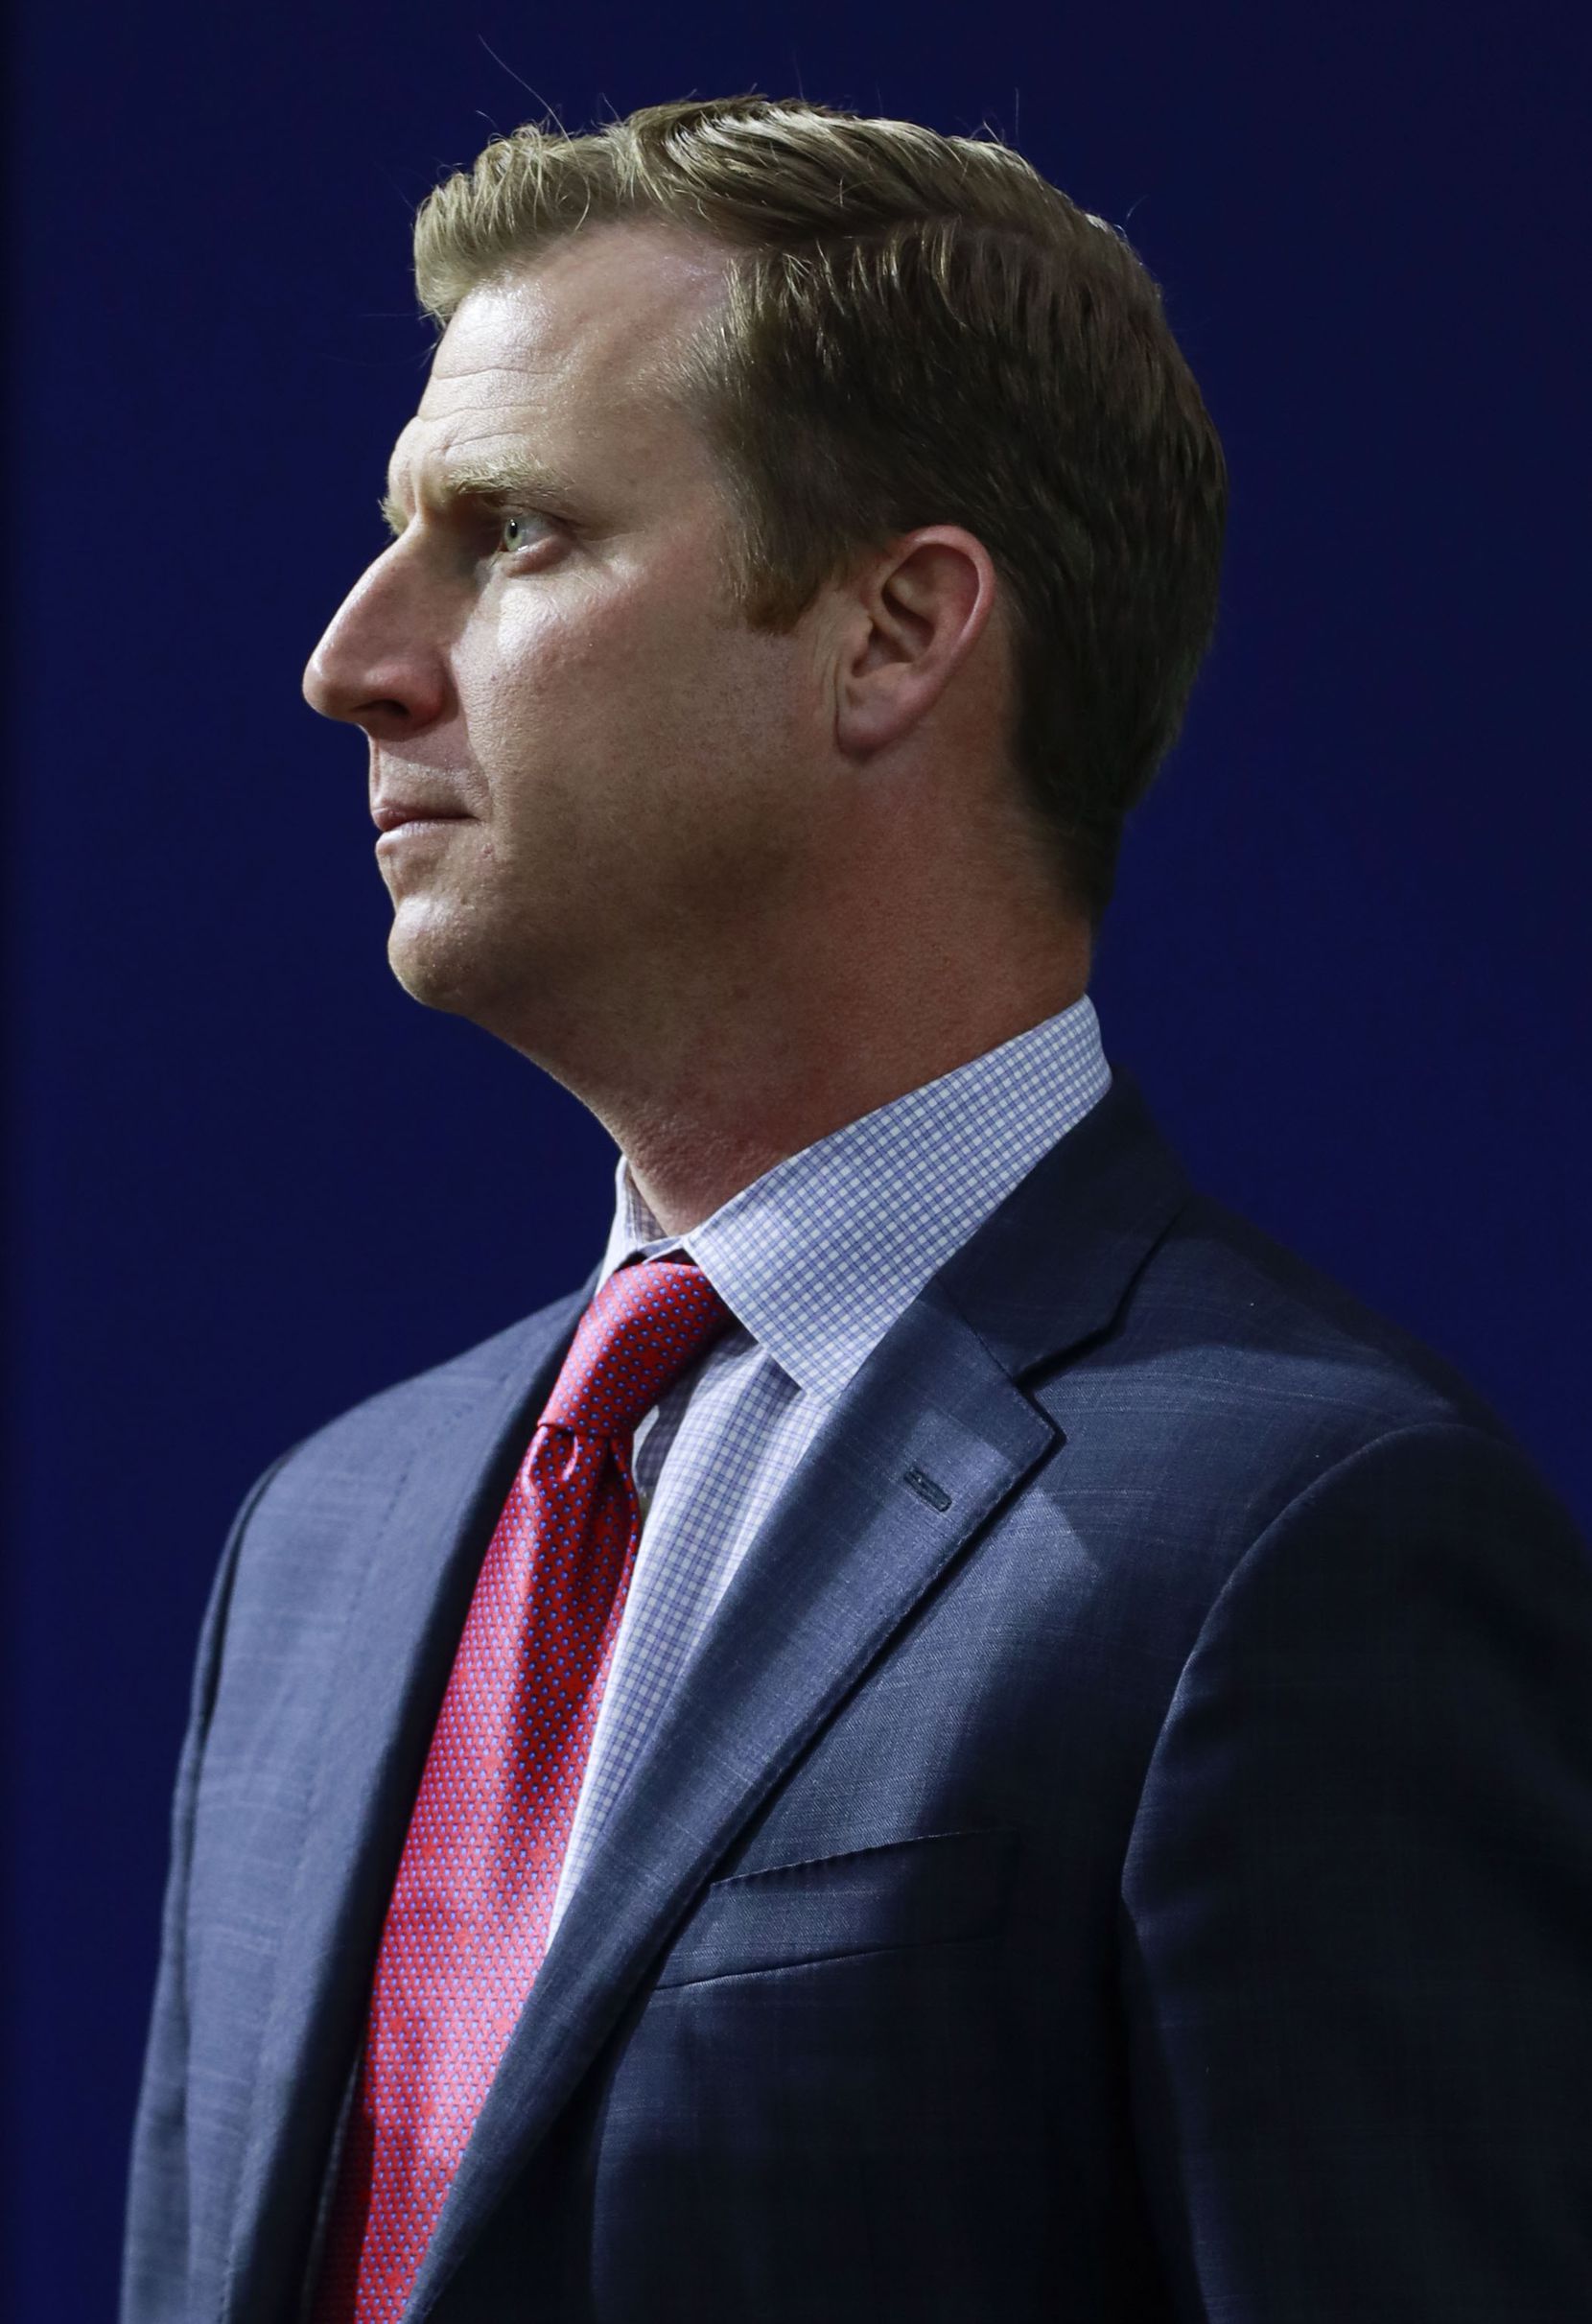 Southern Methodist University's head football coach, Rhett Lashlee speaks with people in attendance of the news conference in Dallas on Tuesday, Nov. 30, 2021. Lashlee was Southern Methodist University's former offensive coordinator football coach in 2018 and 2019 before going to the University of Miami for two seasons. (Rebecca Slezak/The Dallas Morning News)